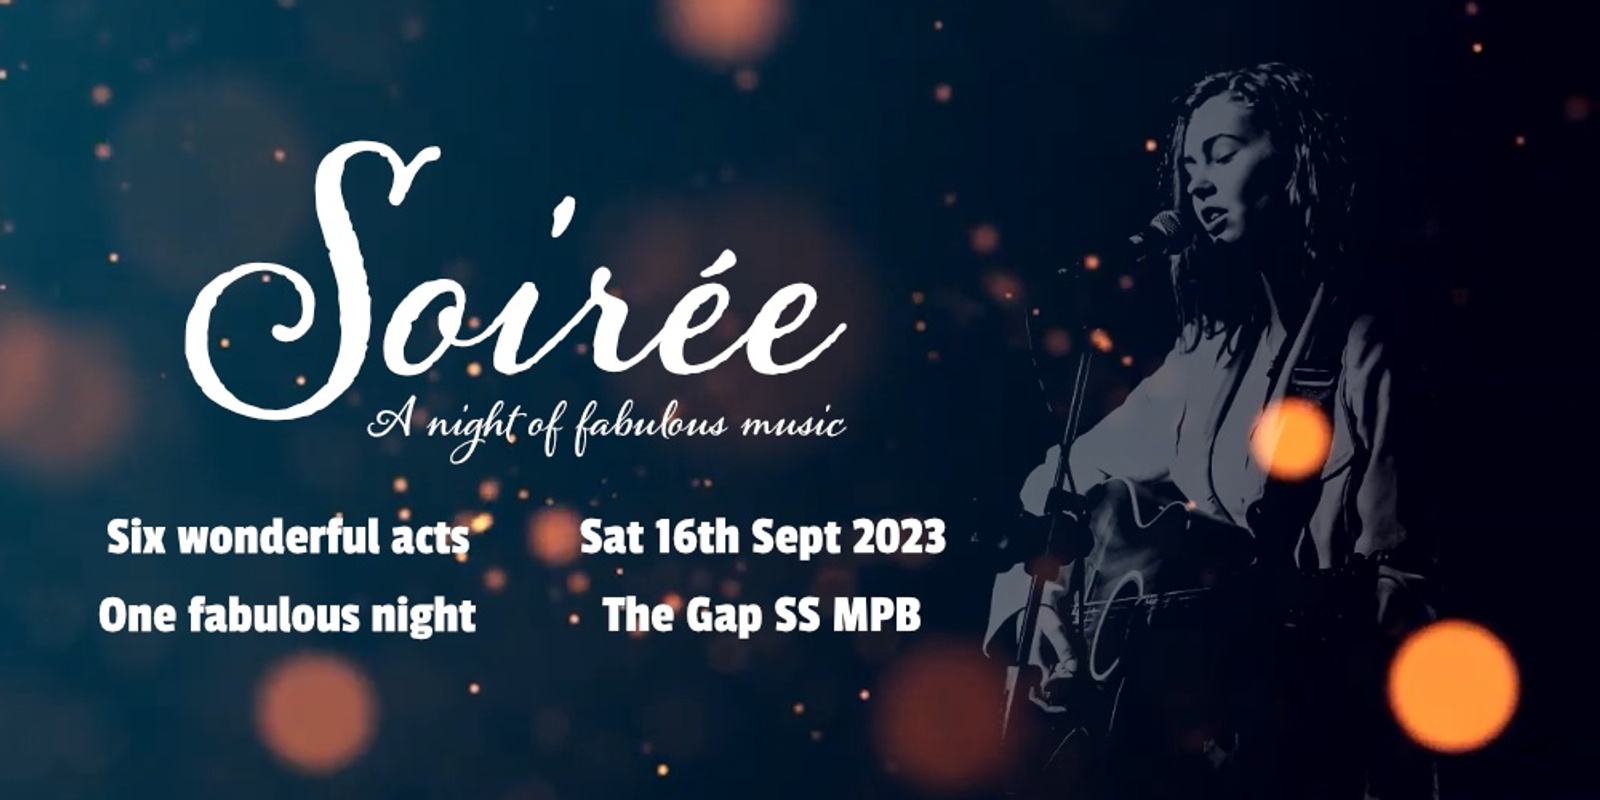 Banner image for Soirée, a night of fabulous music, 2023